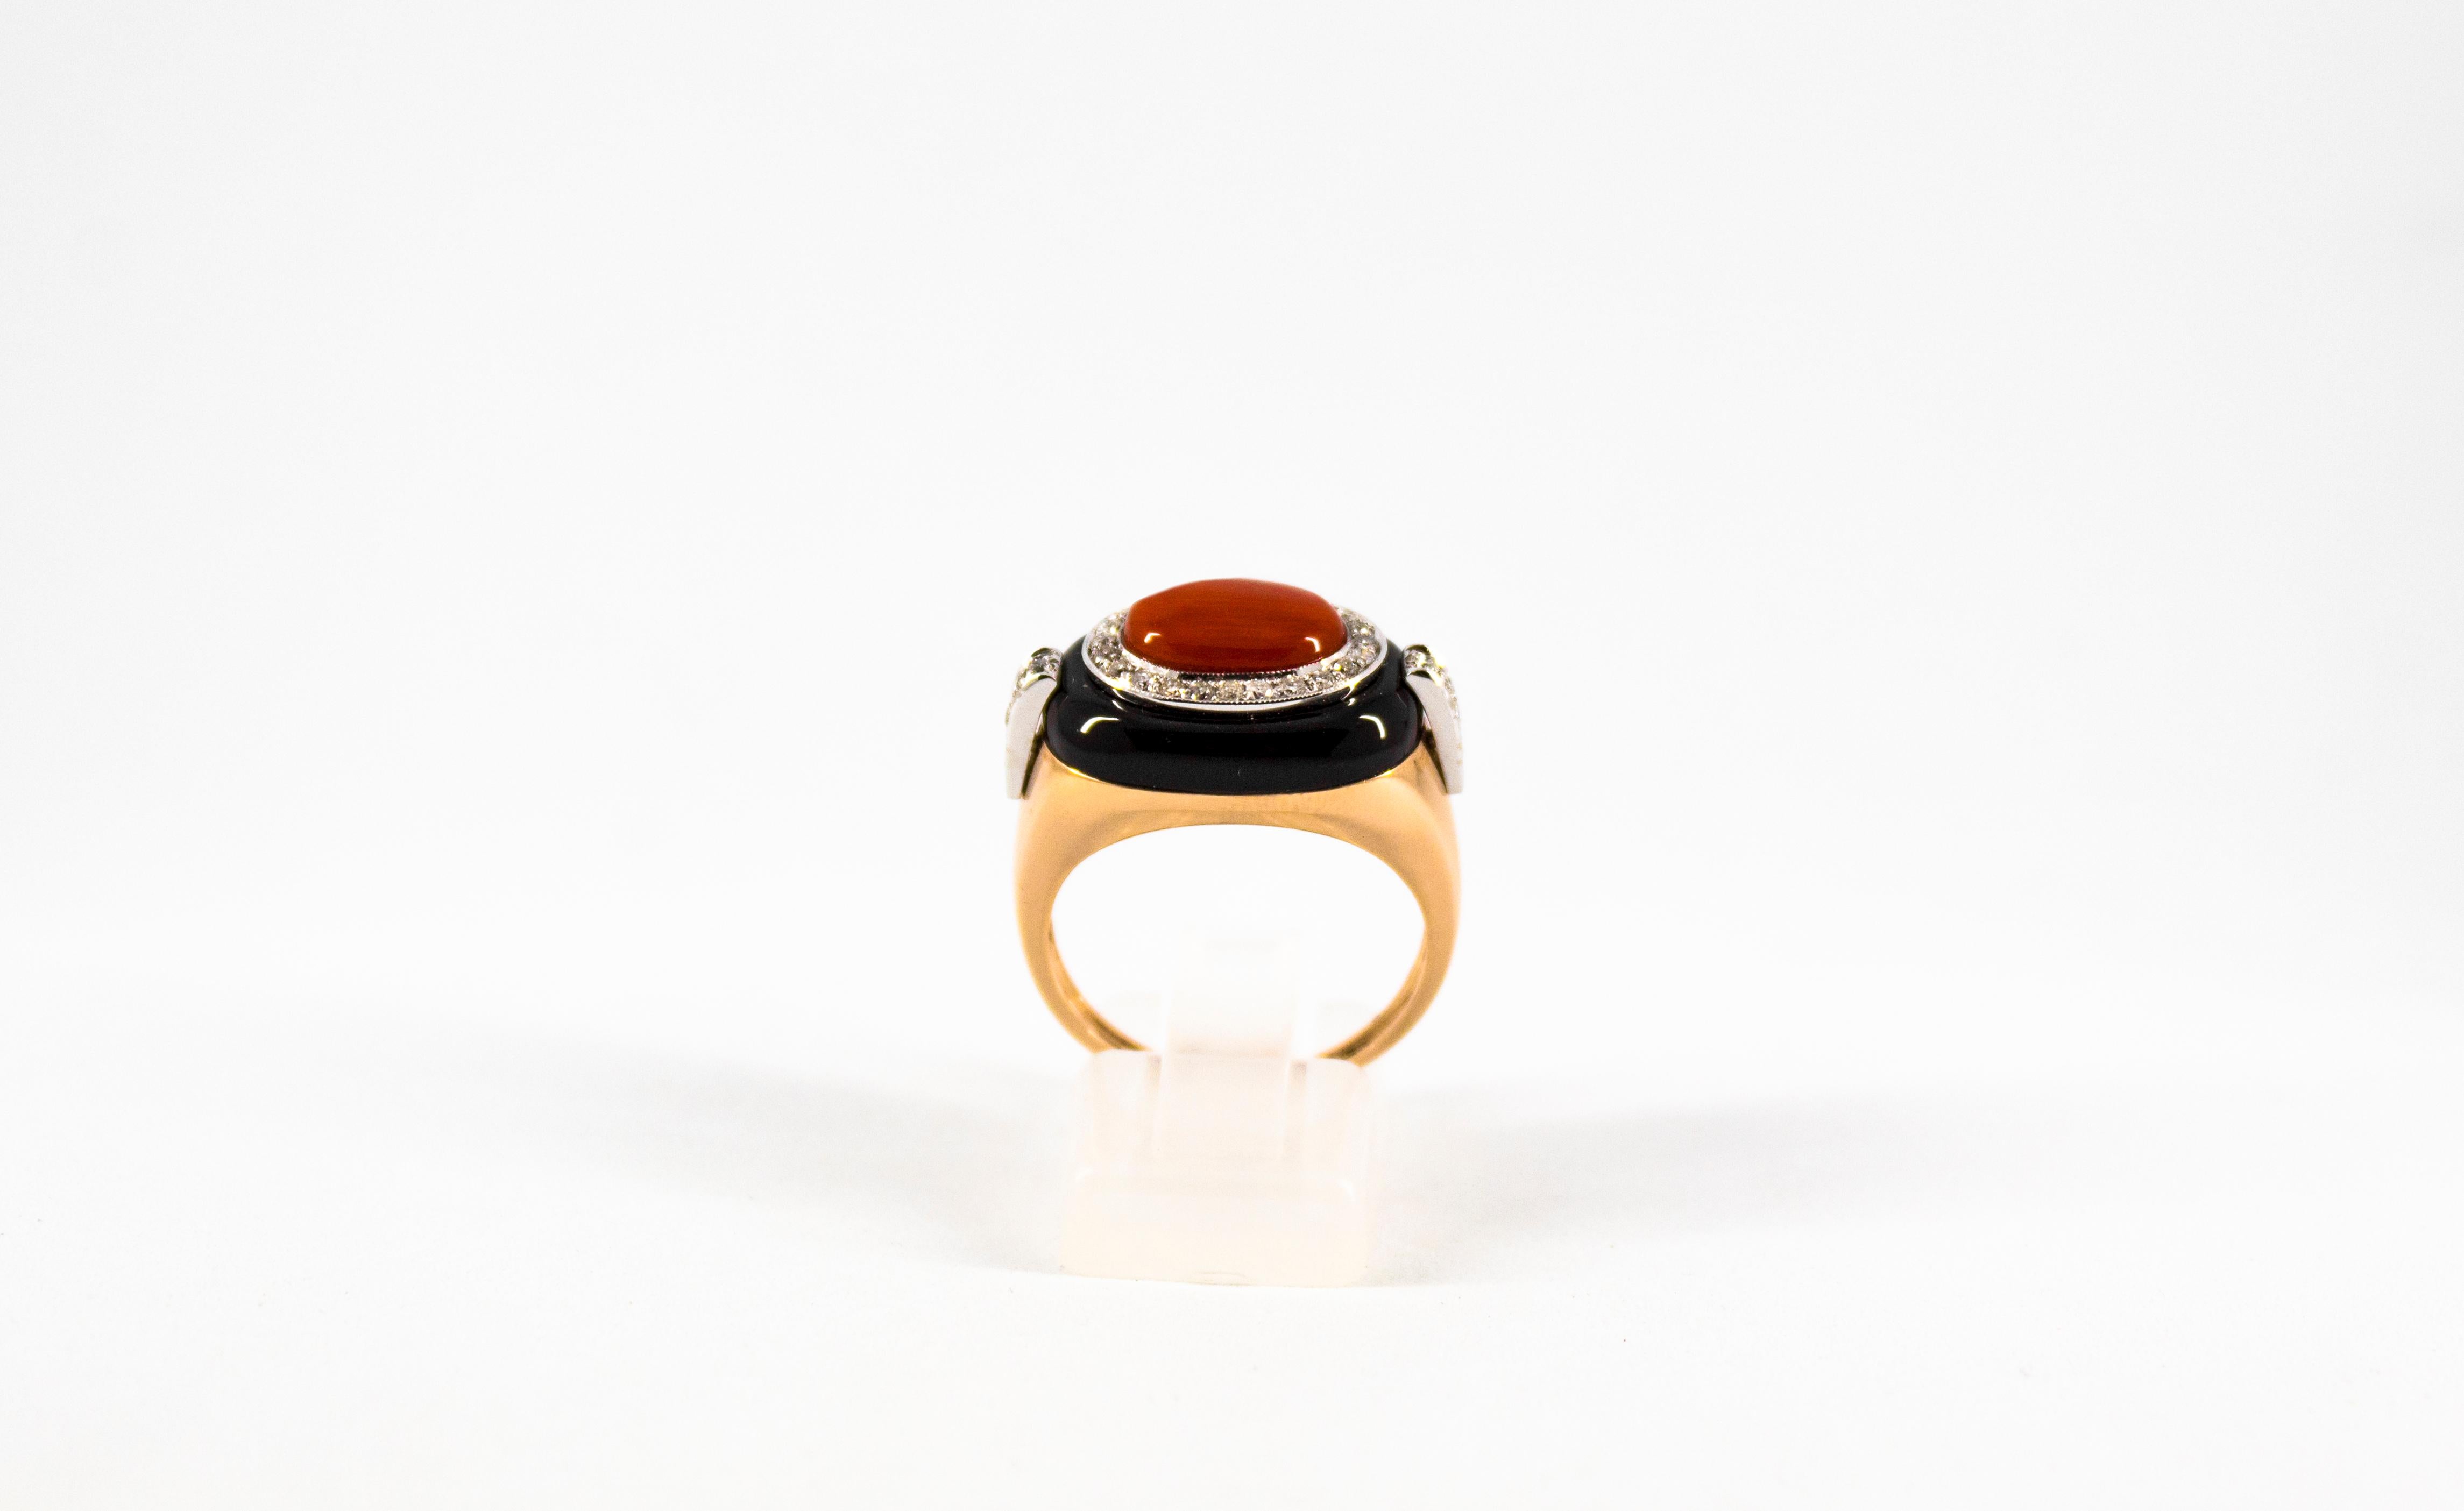 This Ring is made of 14K Yellow Gold.
This Ring has 0.40 Carats of White Diamonds.
This Ring has Onyx and Mediterranean (Sardinia, Italy) Red Coral.
This Ring is inspired by Renaissance Style and it is available also with Turquoise.
Size ITA: 16